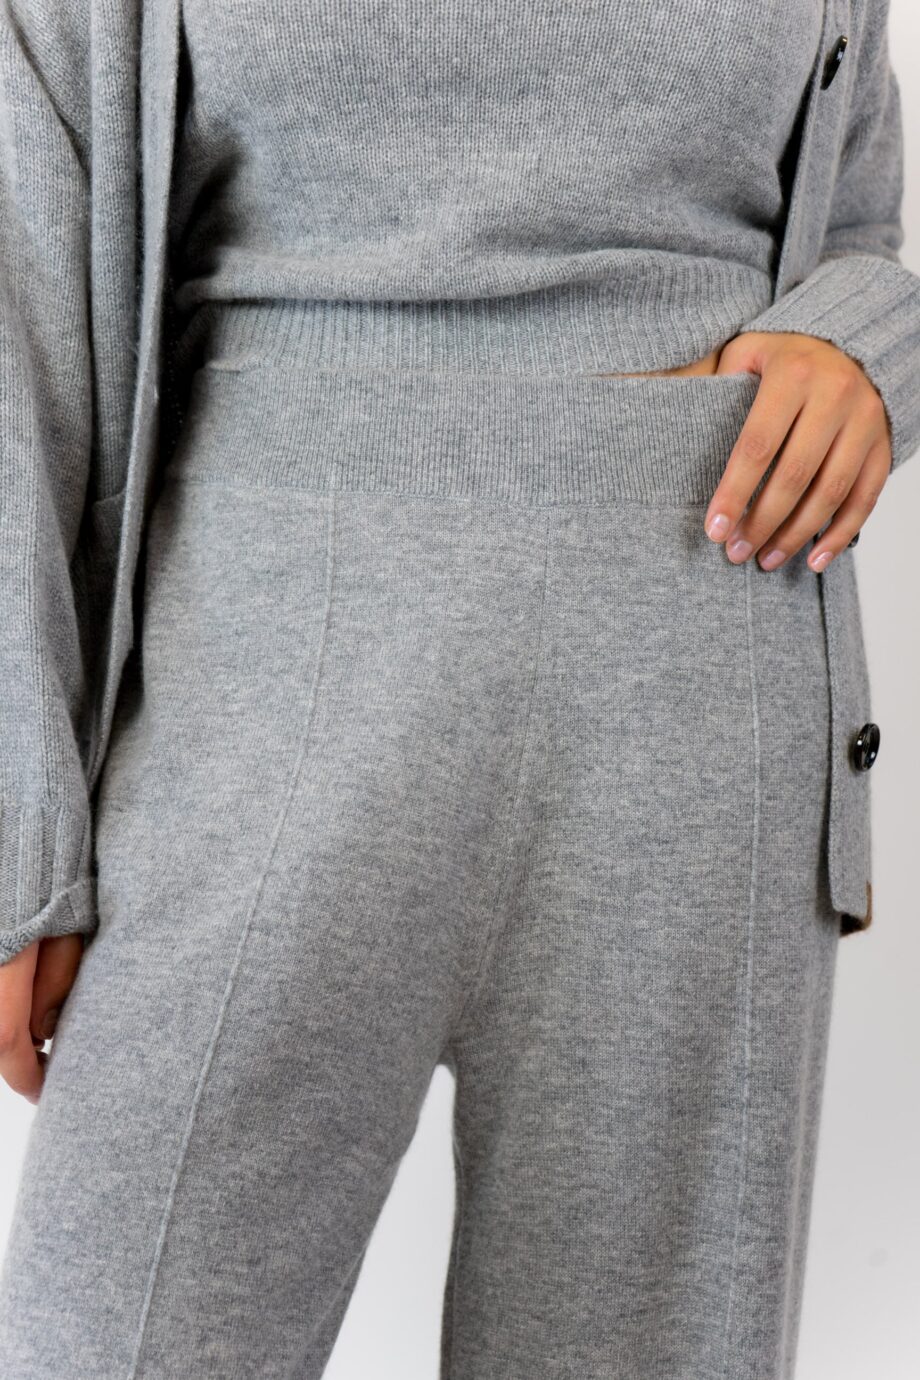 Allude grey pants close